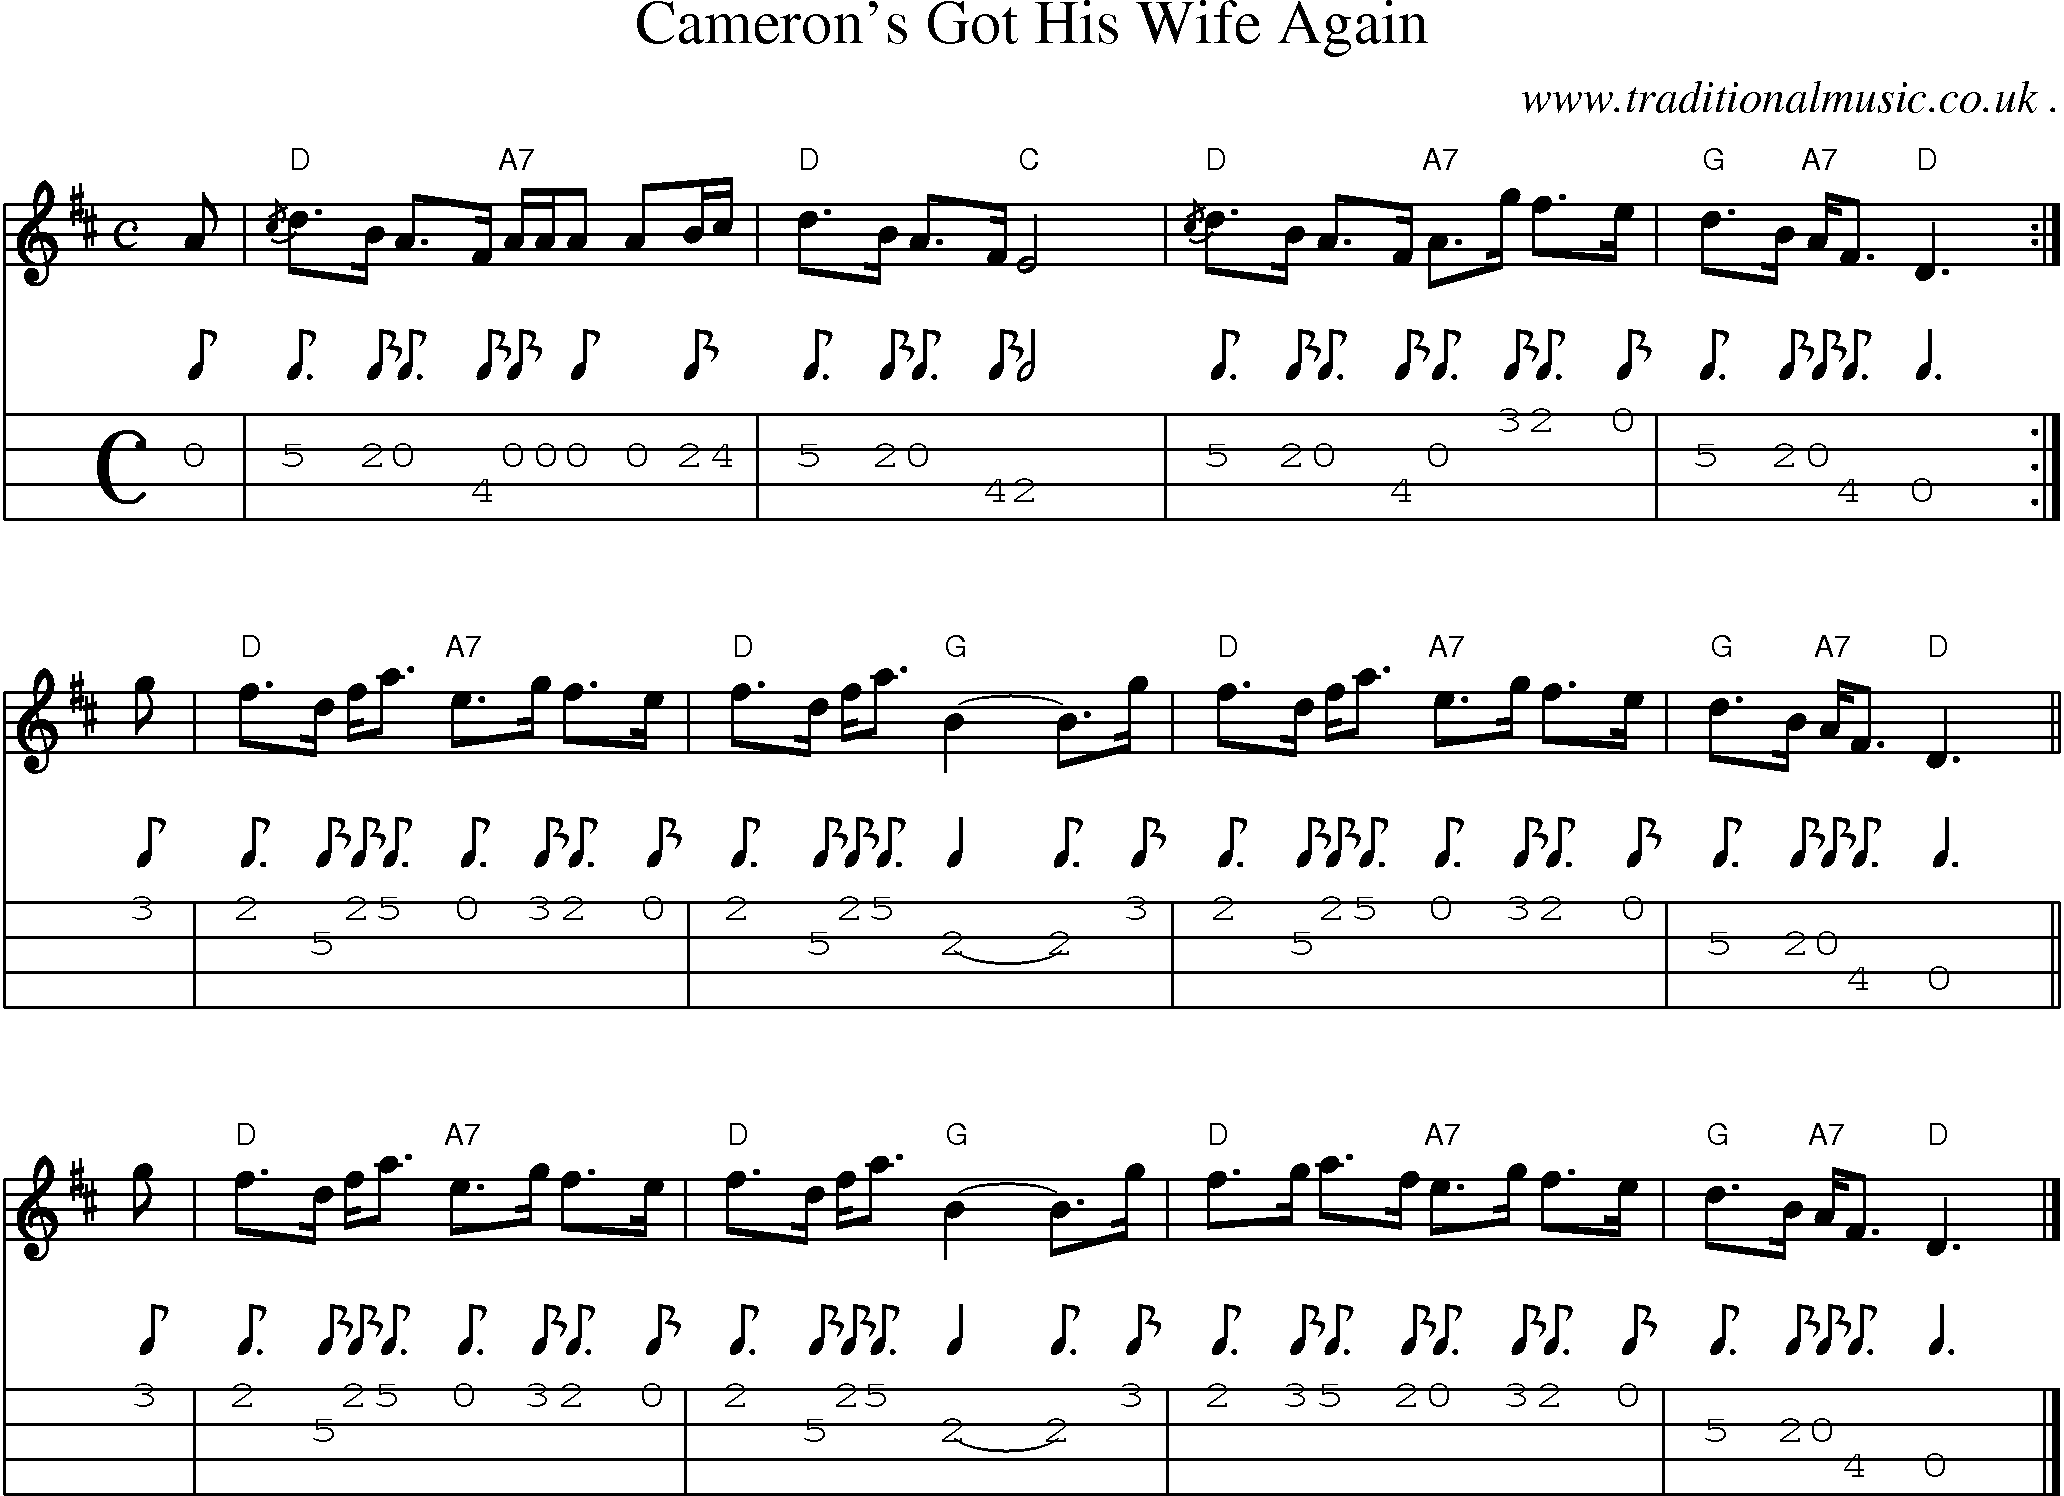 Sheet-music  score, Chords and Mandolin Tabs for Camerons Got His Wife Again